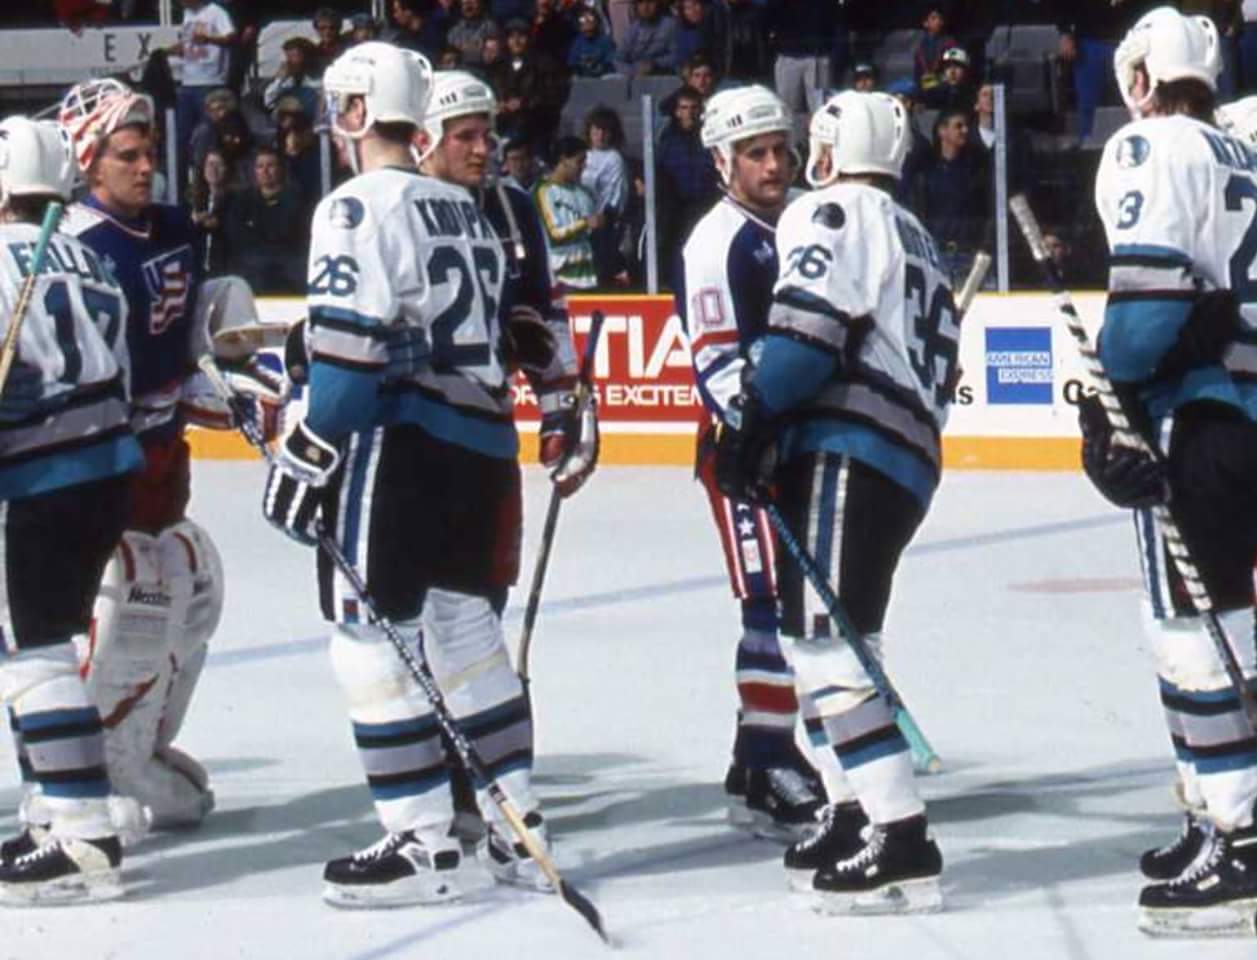 What Game Used San Jose Sharks Jerseys Do You Own?  HFBoards - NHL Message  Board and Forum for National Hockey League